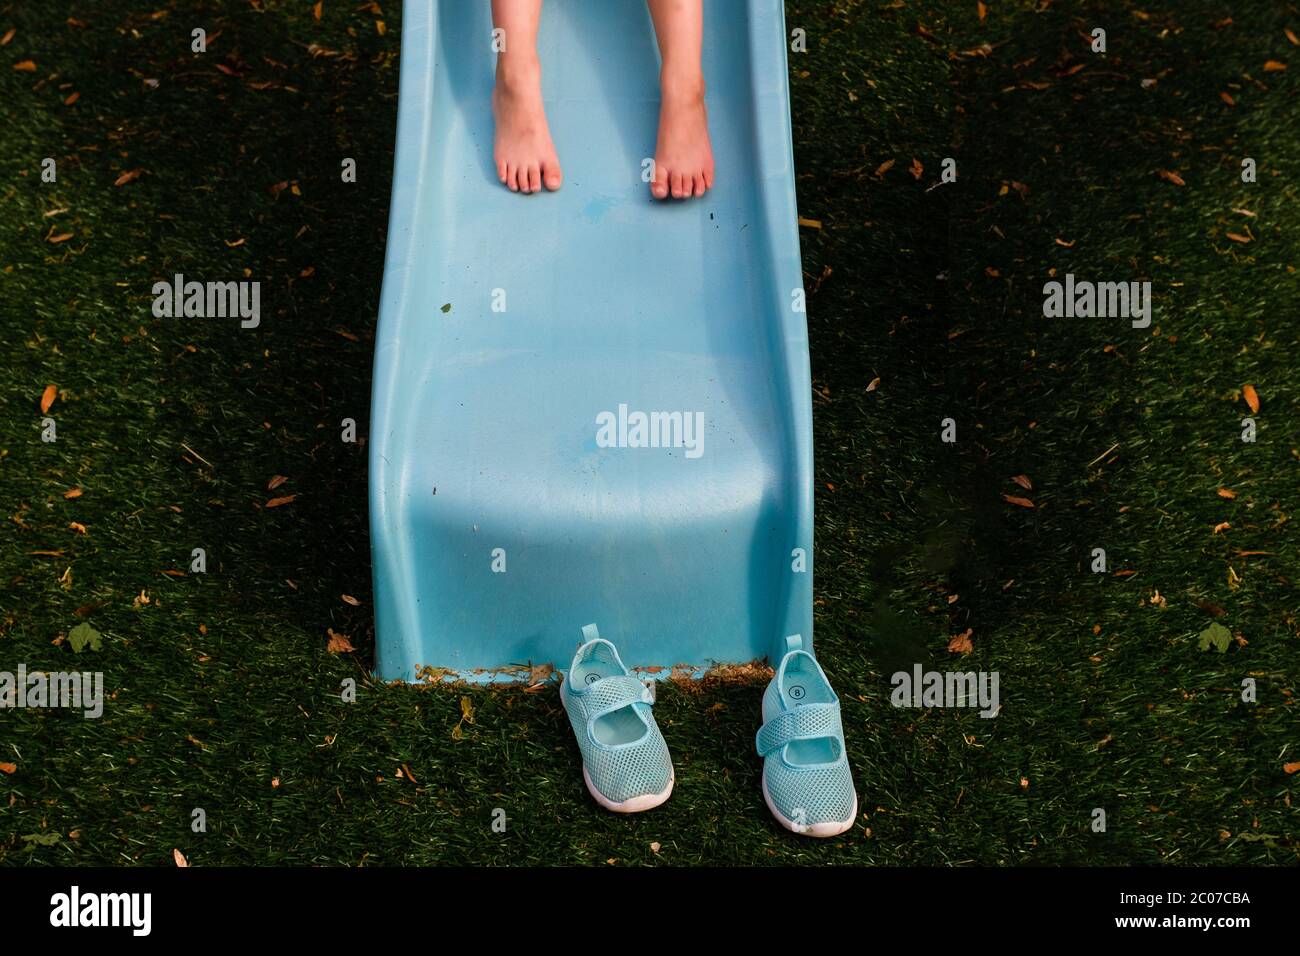 Barefoot child on blue slide with shoes on ground Stock Photo